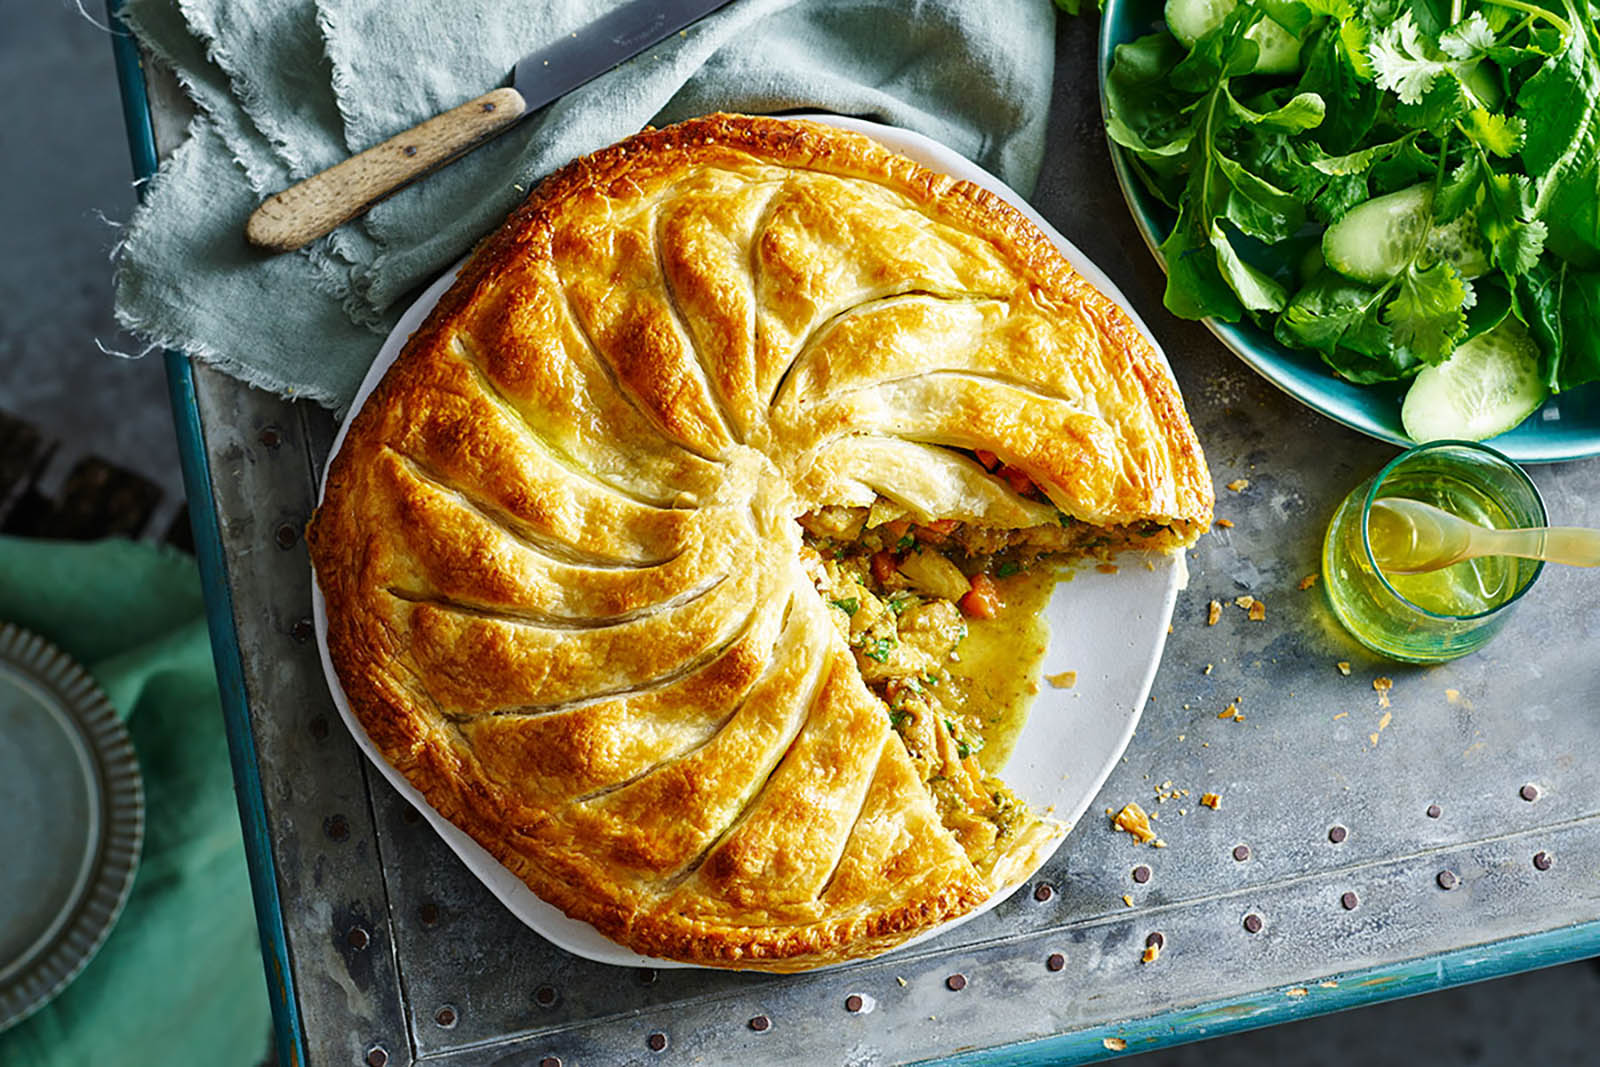 🍗 You’re Only a True Chicken Lover If You’ve Eaten at Least 21/30 of These Foods Chicken Pie